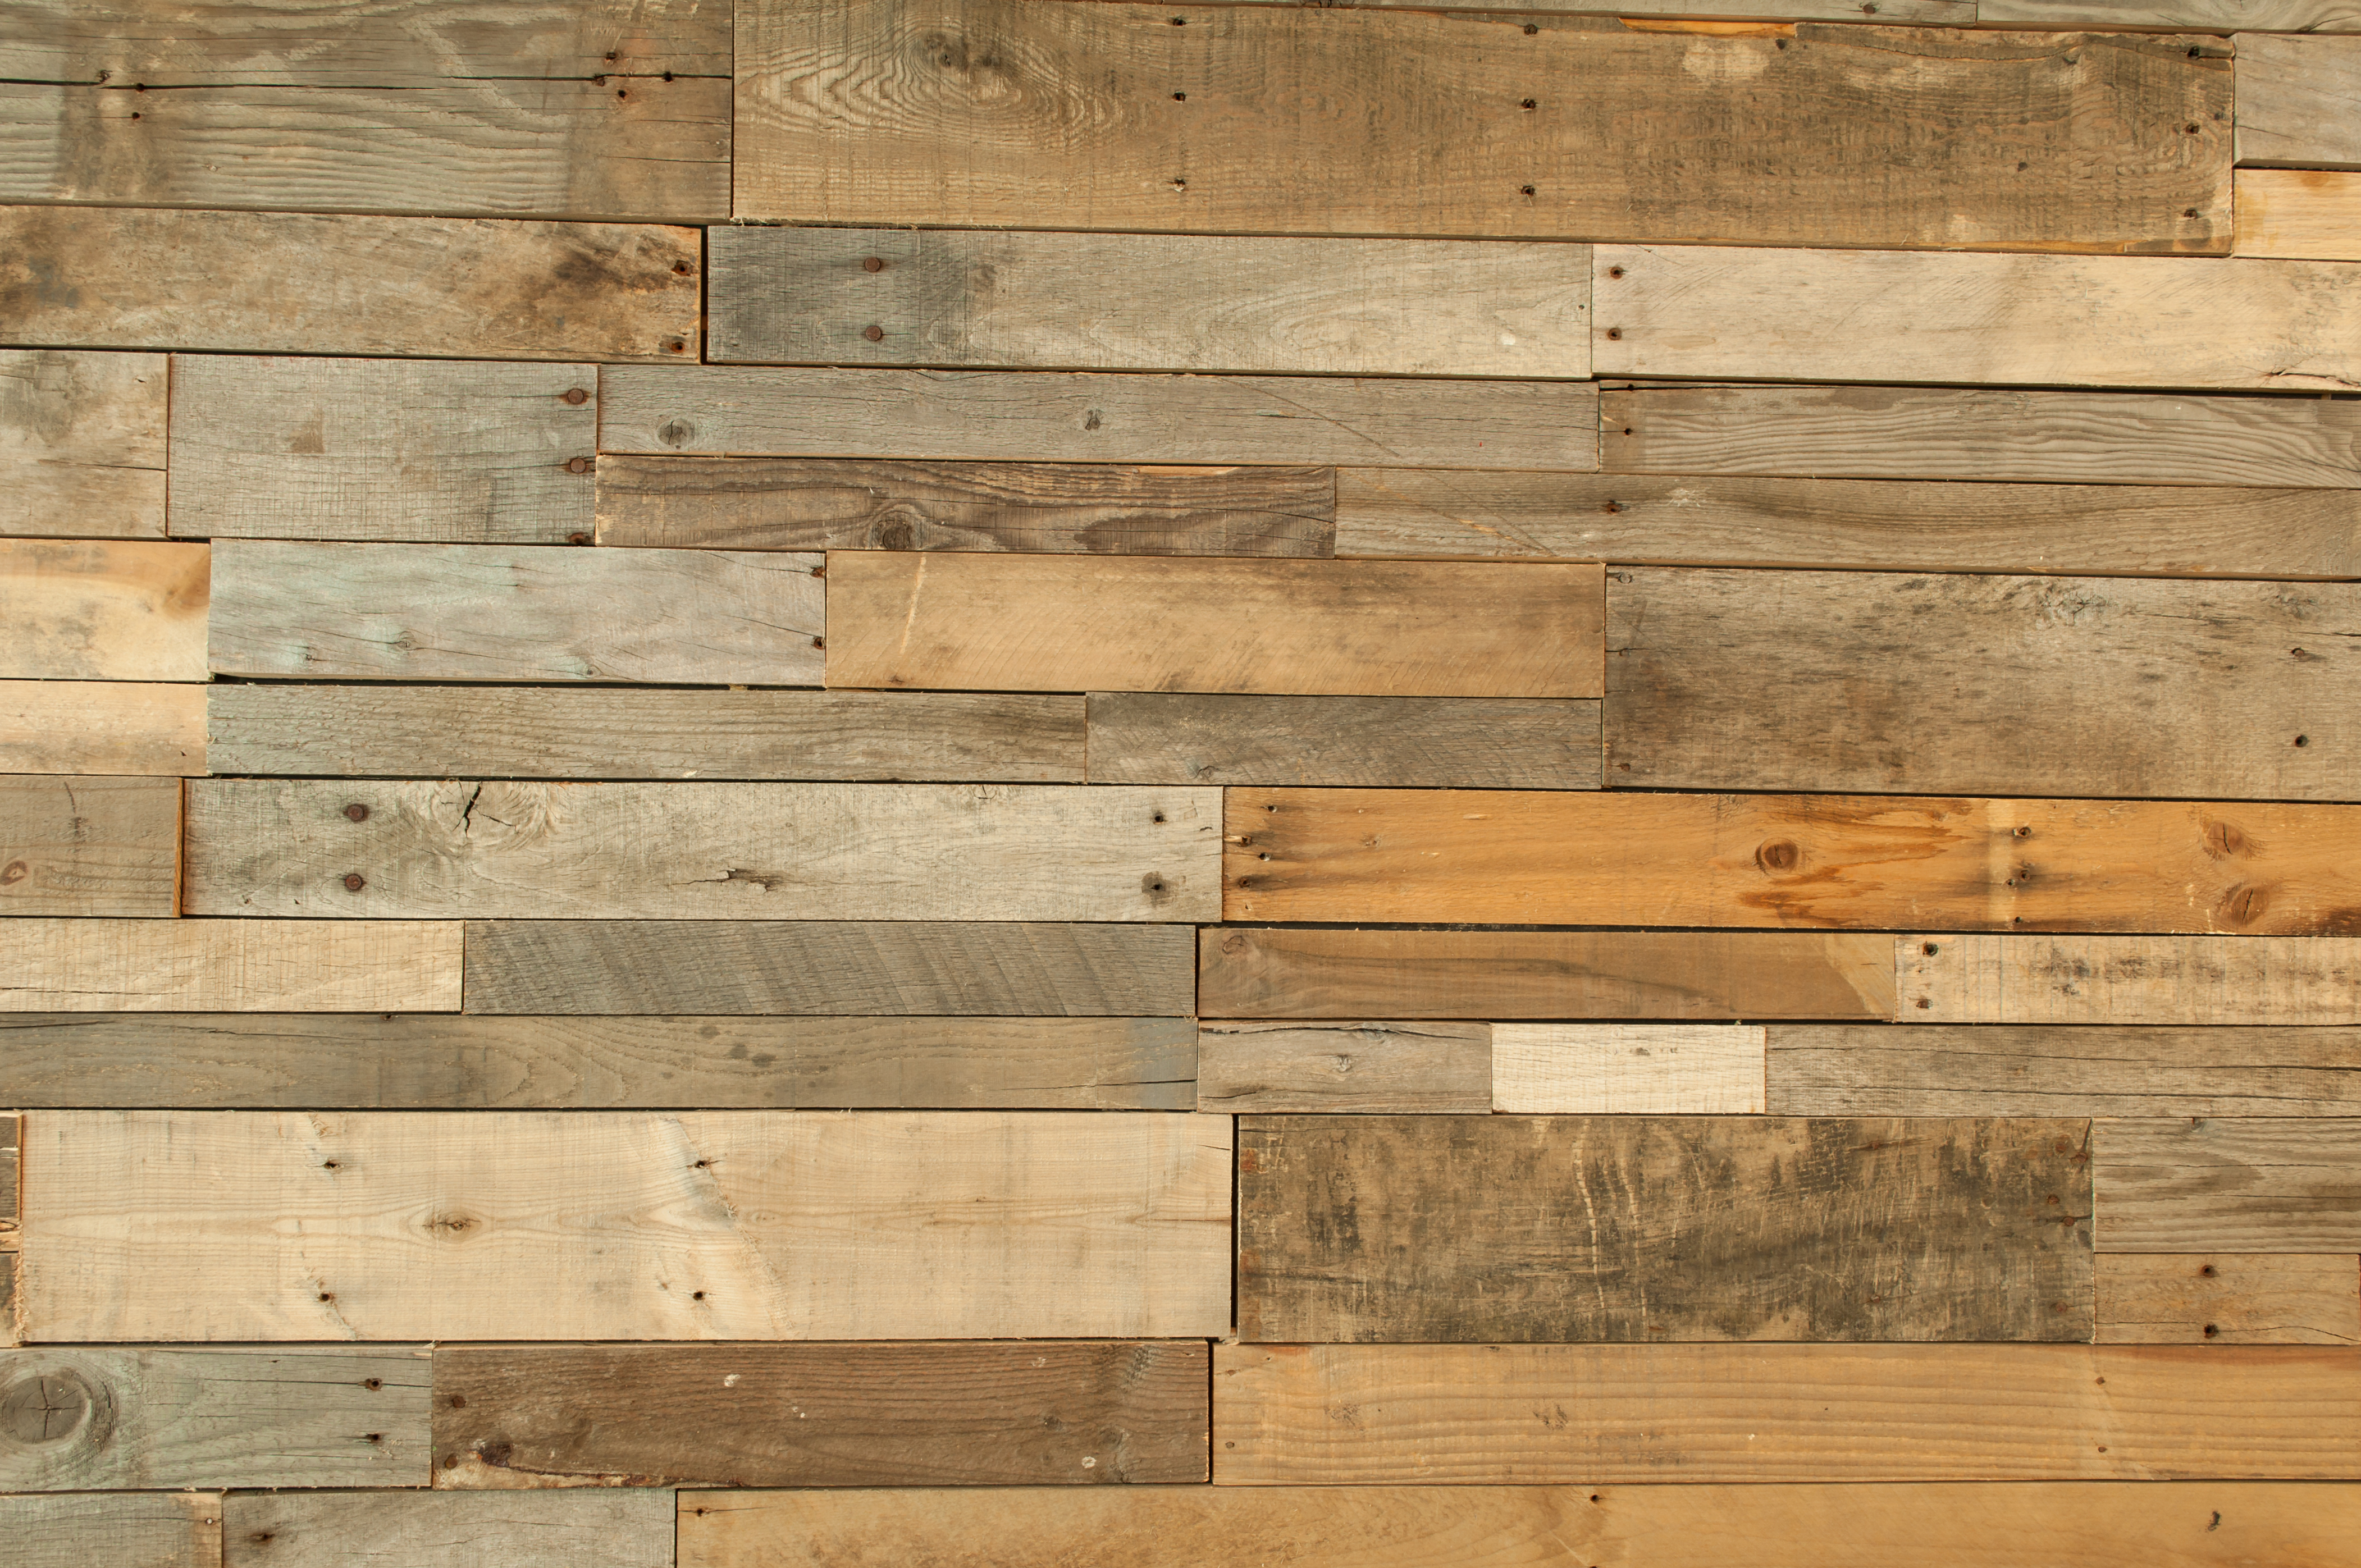 20-FREE-BEAUTIFUL-HI-RES-WOOD-TEXTURE-WALLPAPER-BACKGROUNDS-01-reclaimed- wood - The Dentists on Bluemound